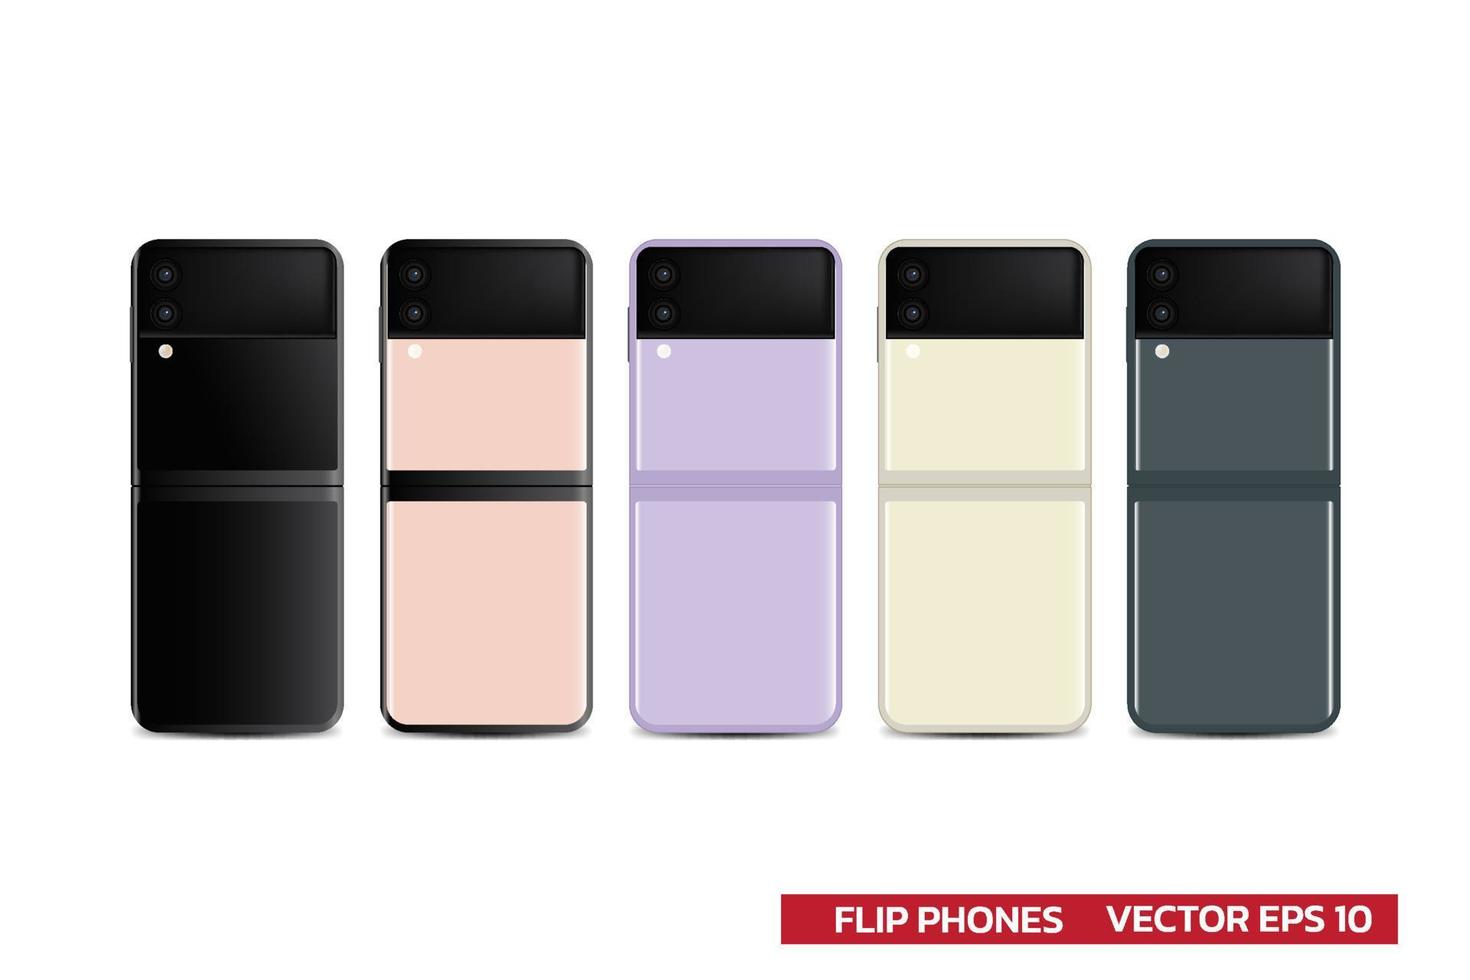 New device flip phone fold phone, smart phone flagship with more color realistic vector illustration